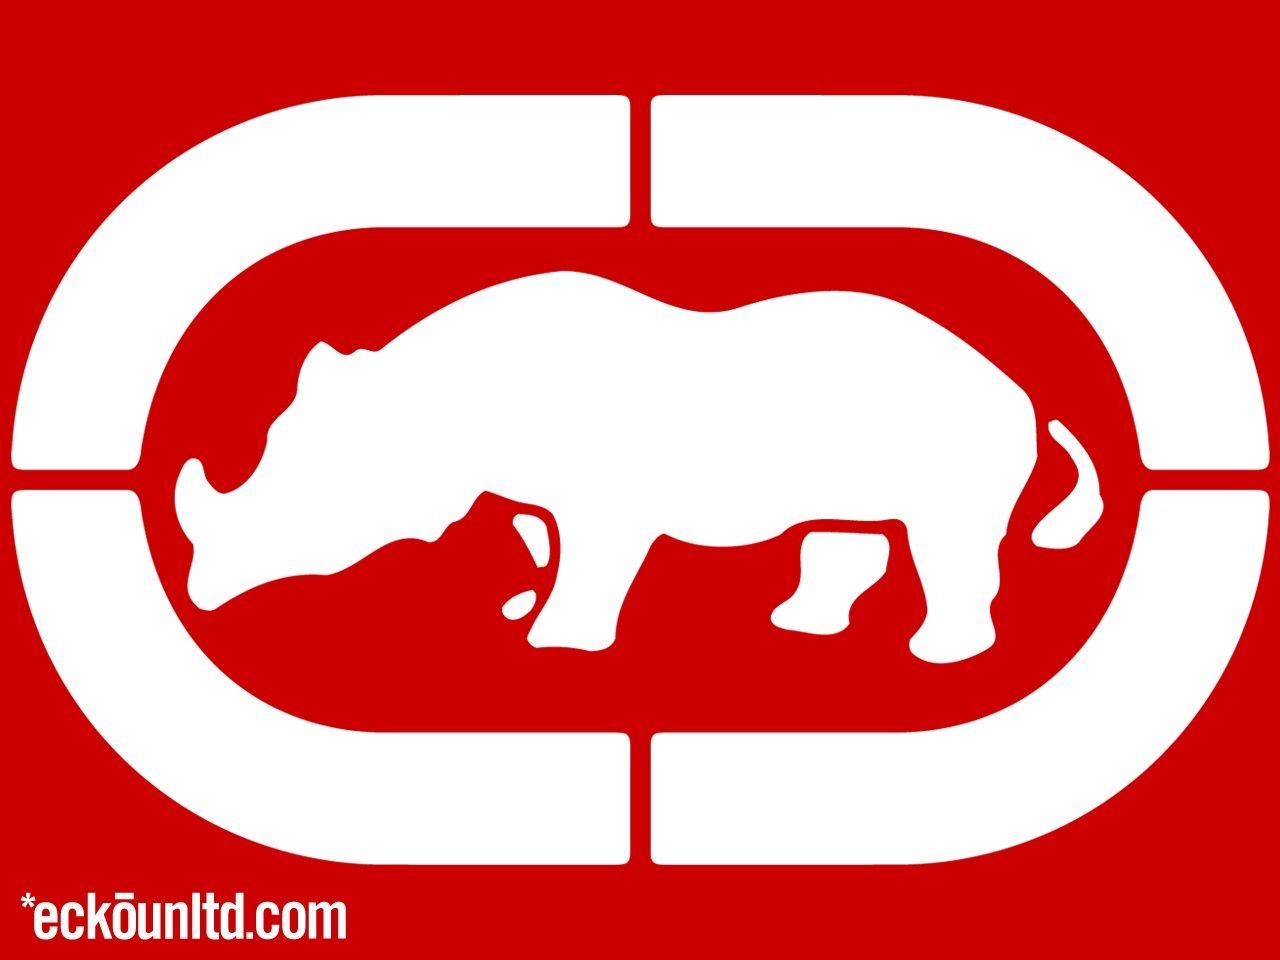 Ecko Unlimited Logo - Ecko Unlimited Apparel uses a rhino (which is endangered) in their